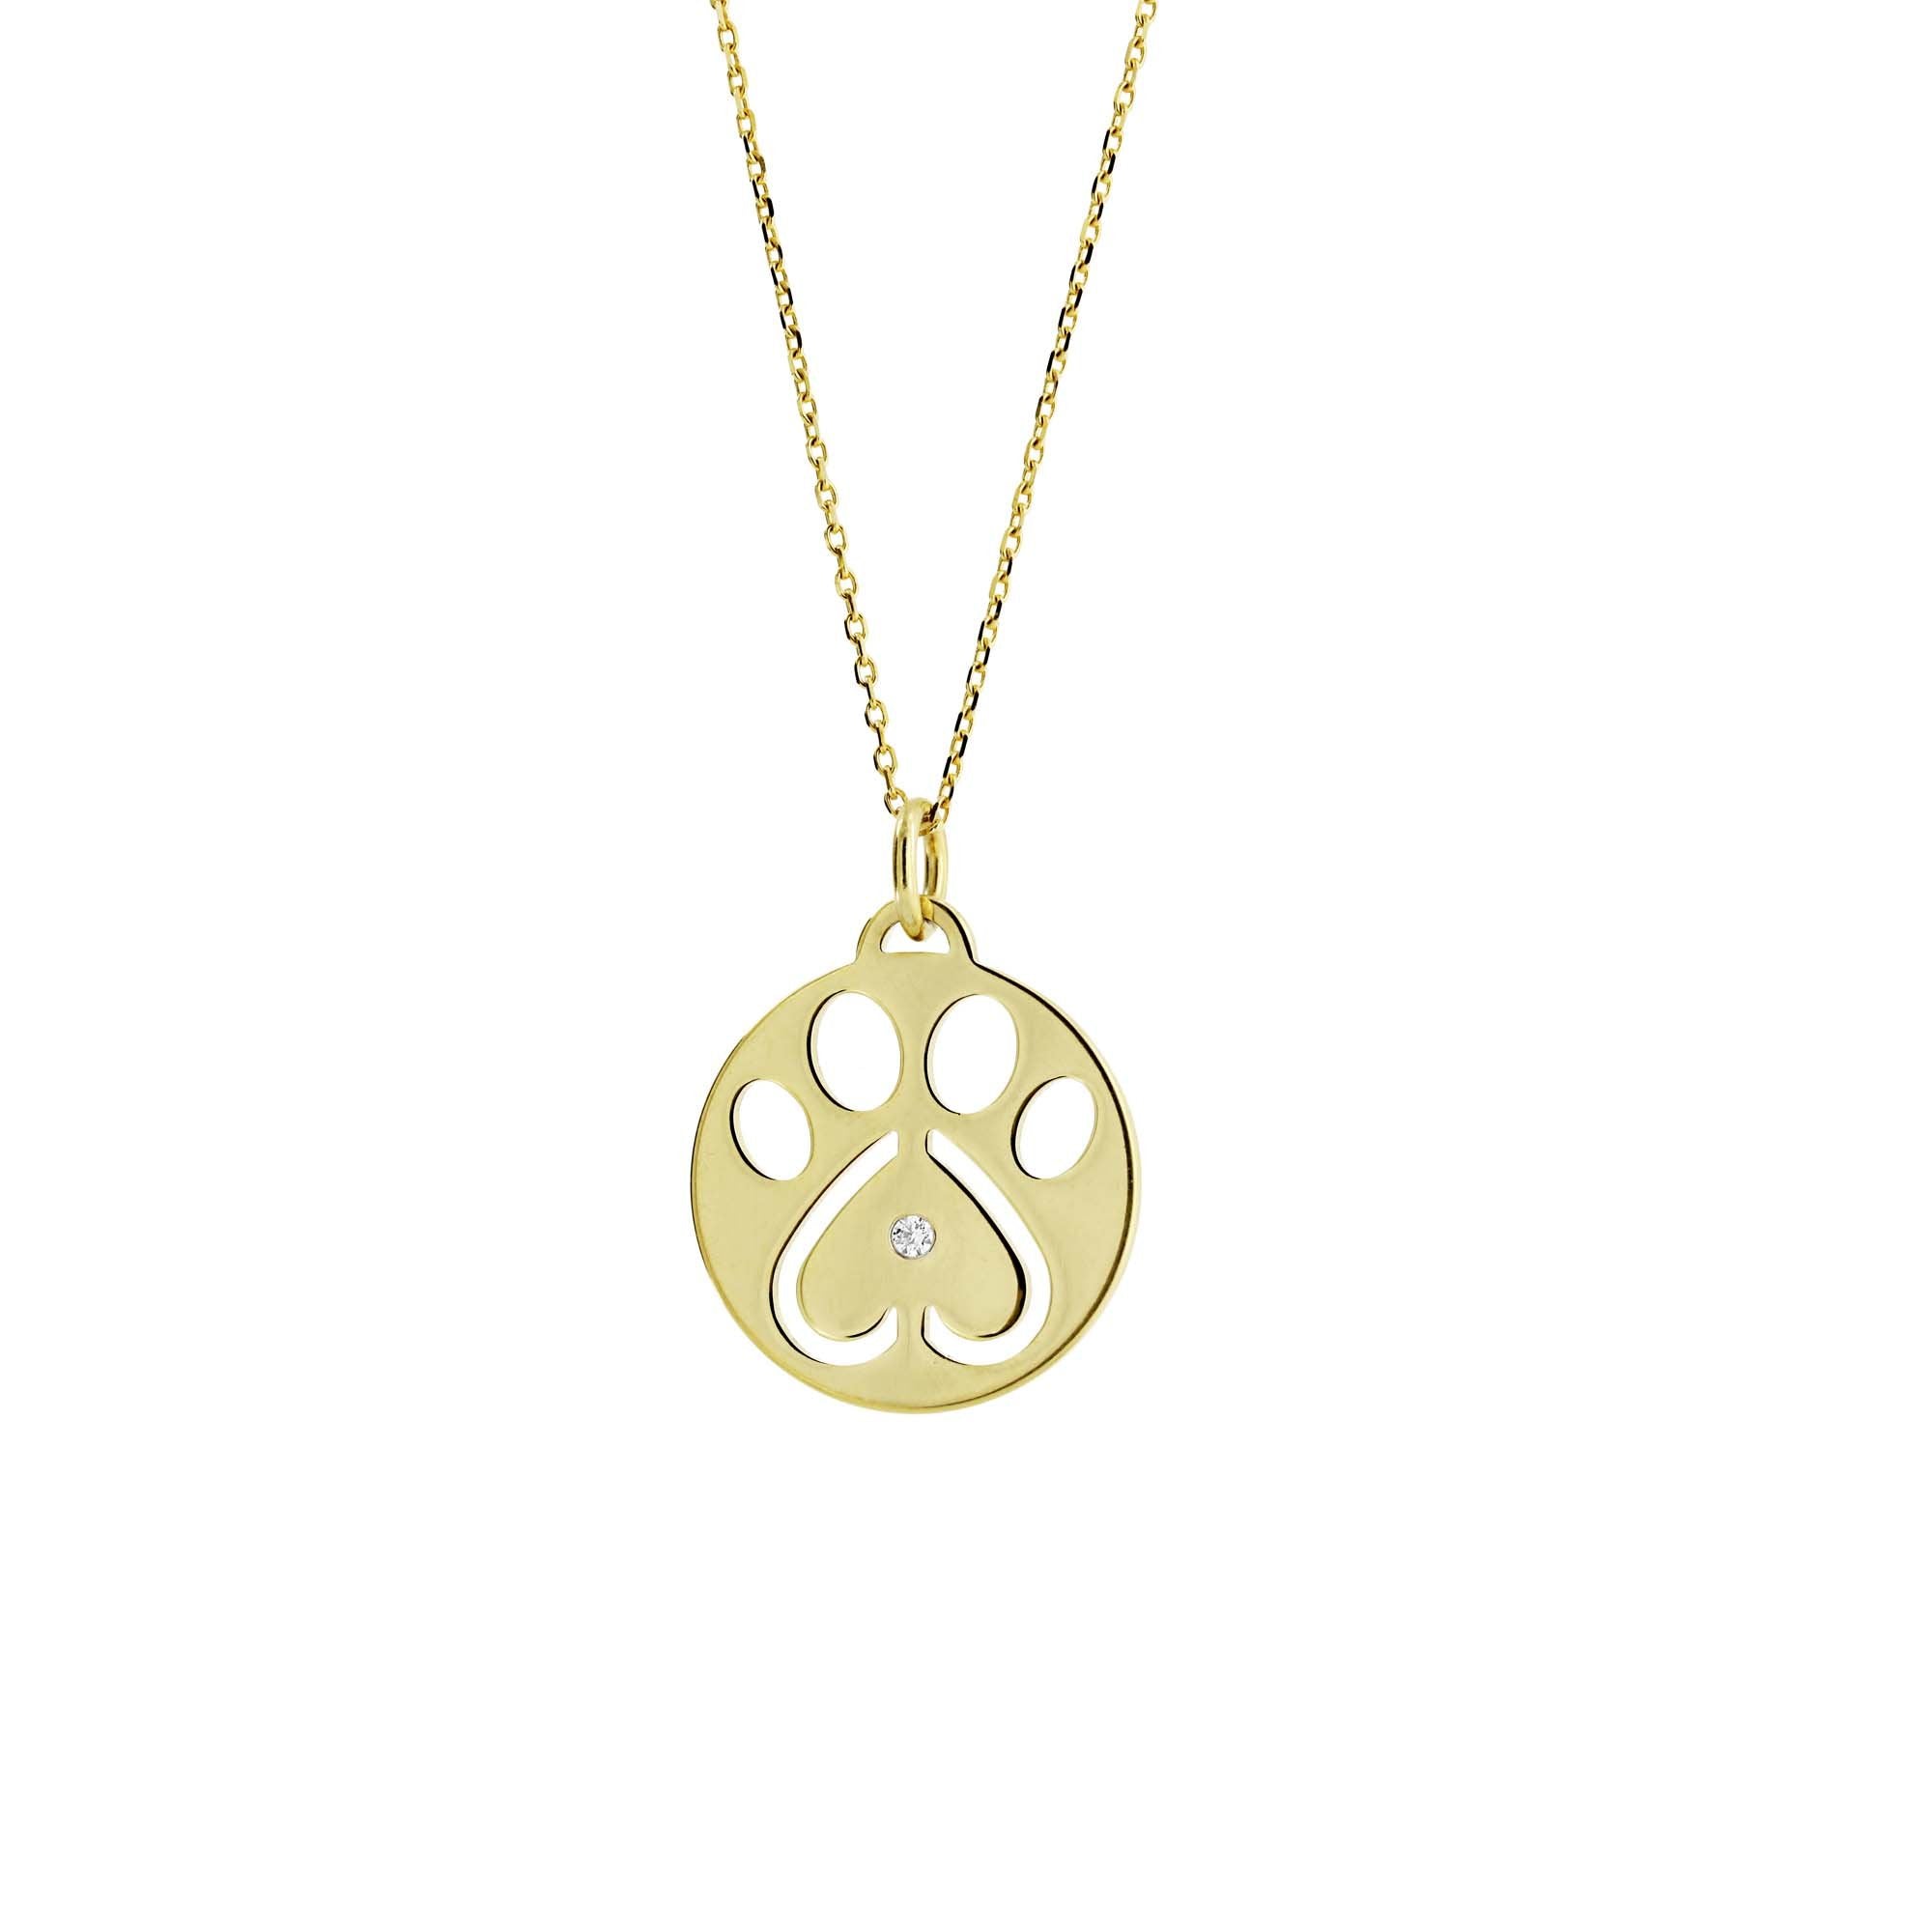 Pet Paw Print Necklace – Reflection of Memories